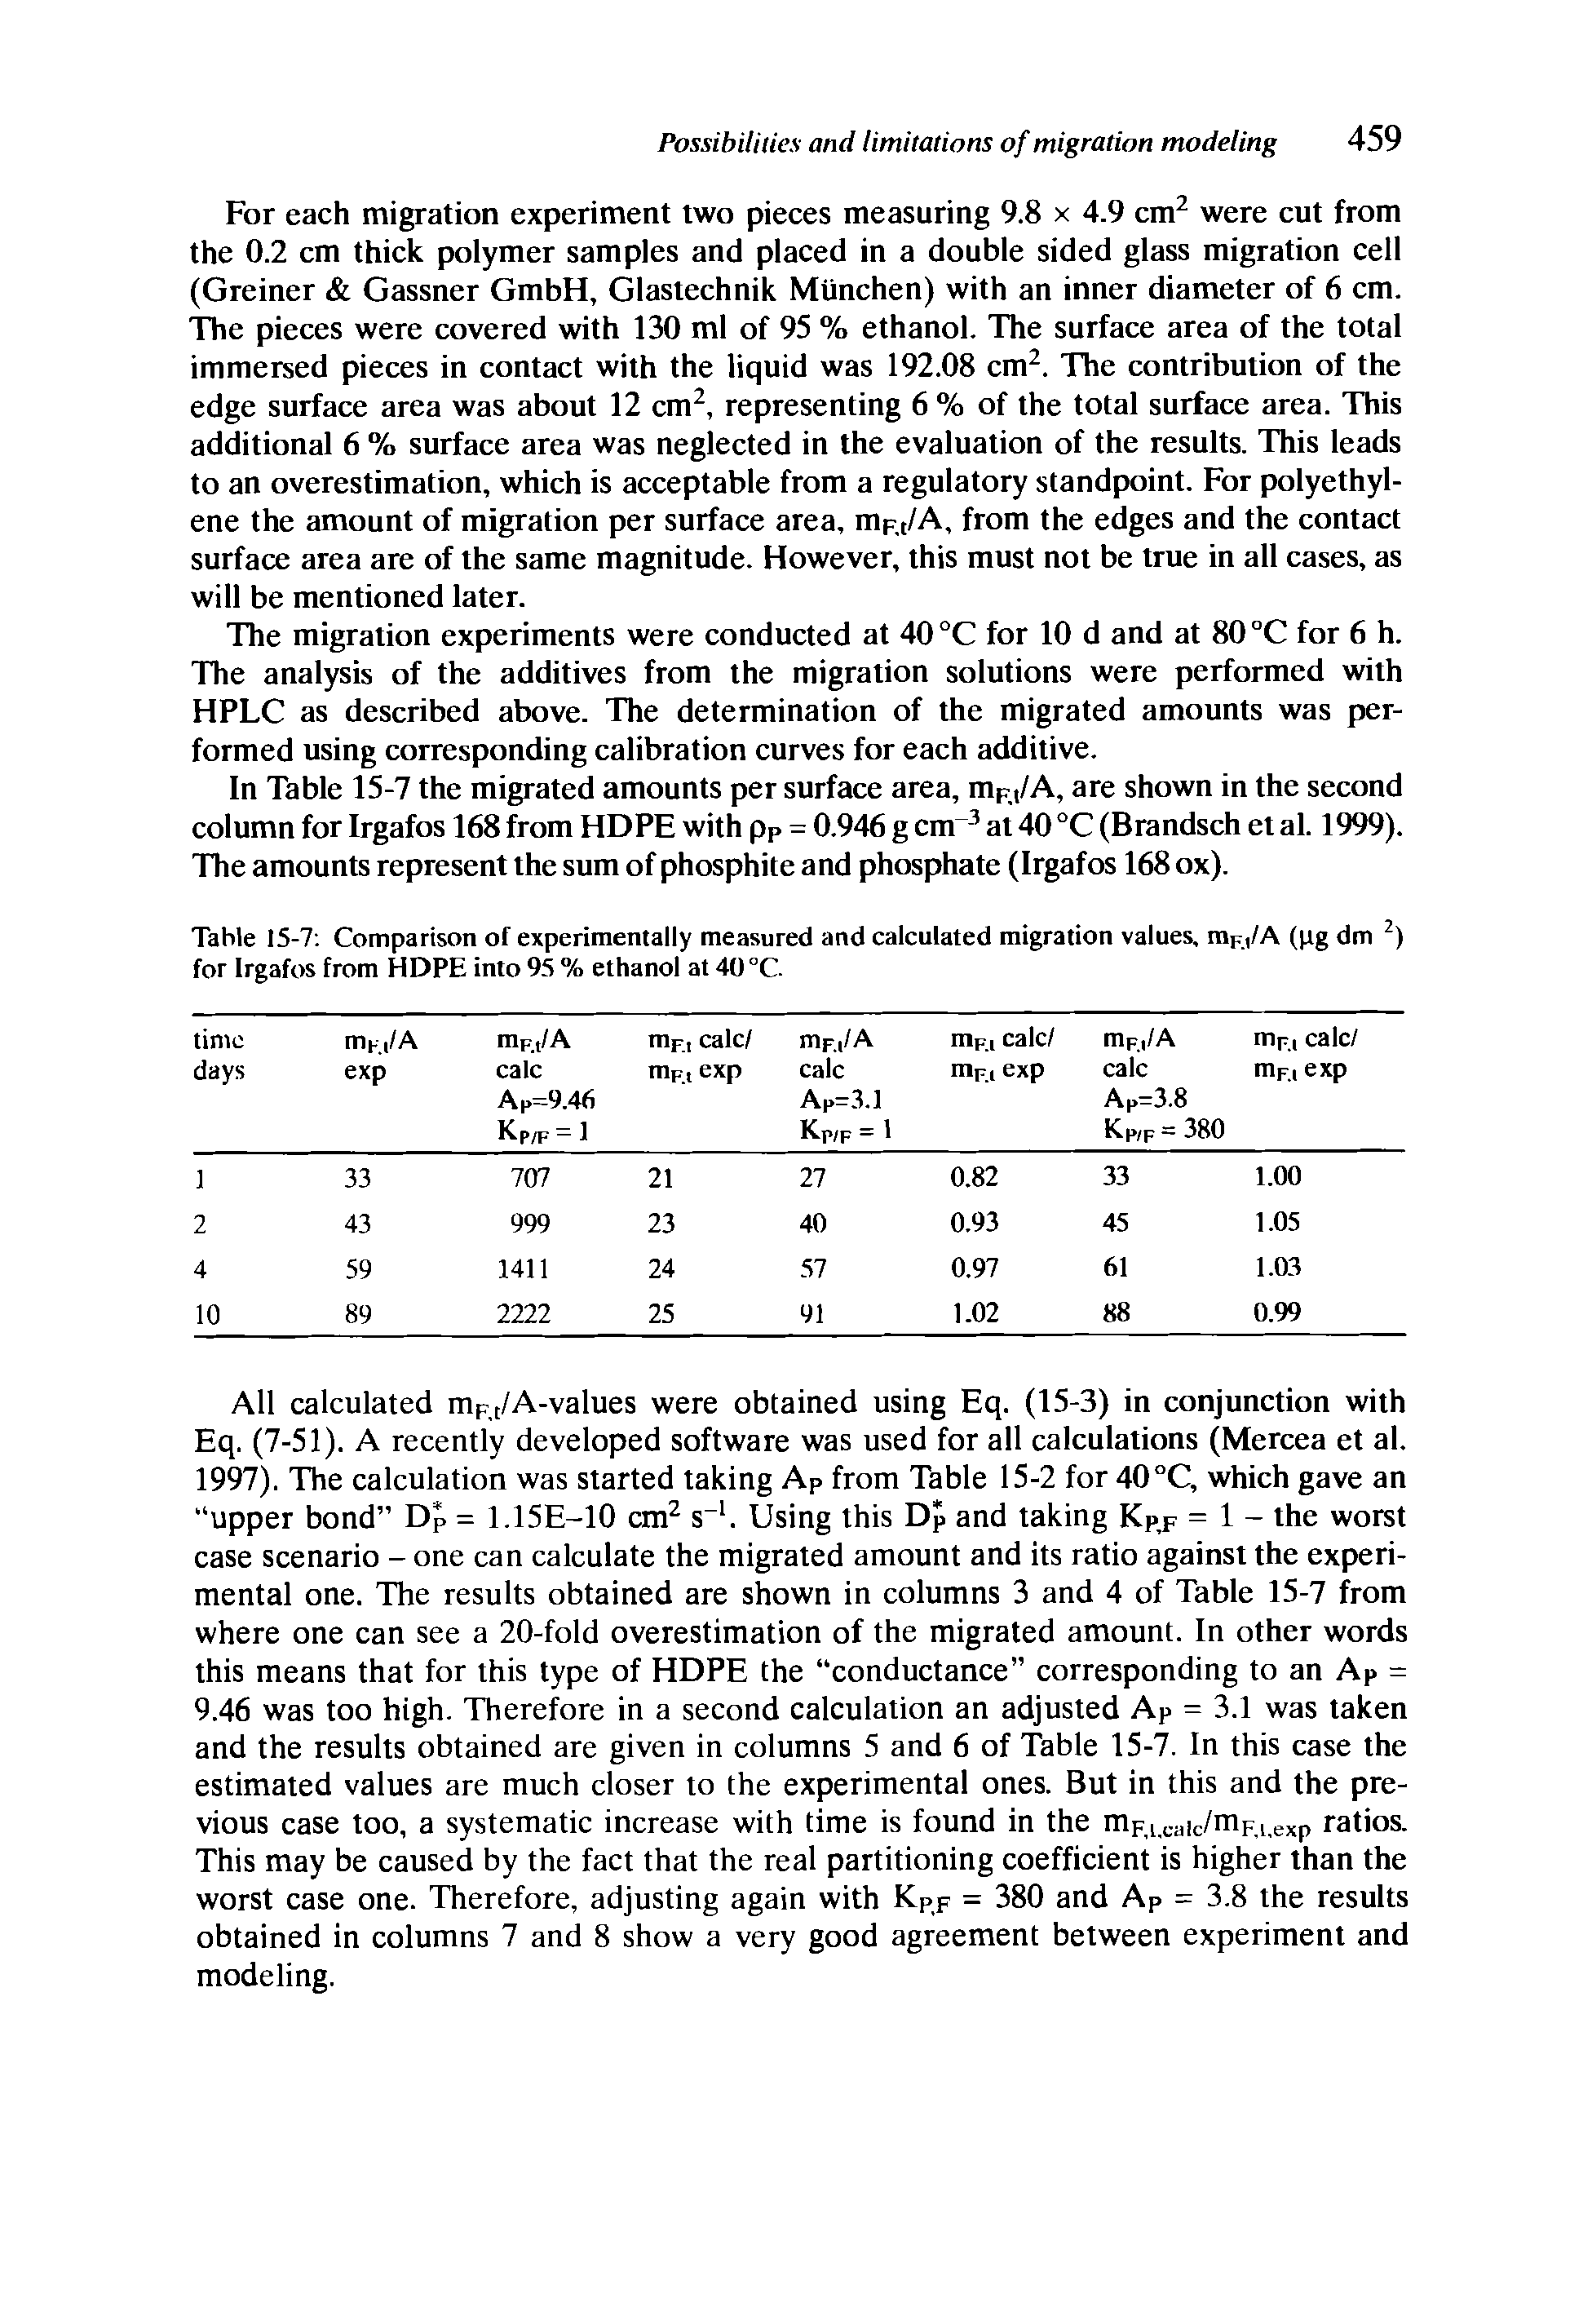 Table 15-7 Comparison of experimentally measured and calculated migration values, mF(/A (pg dm 2) for Irgafos from HDPE into 95 % ethanol at 40 °C.